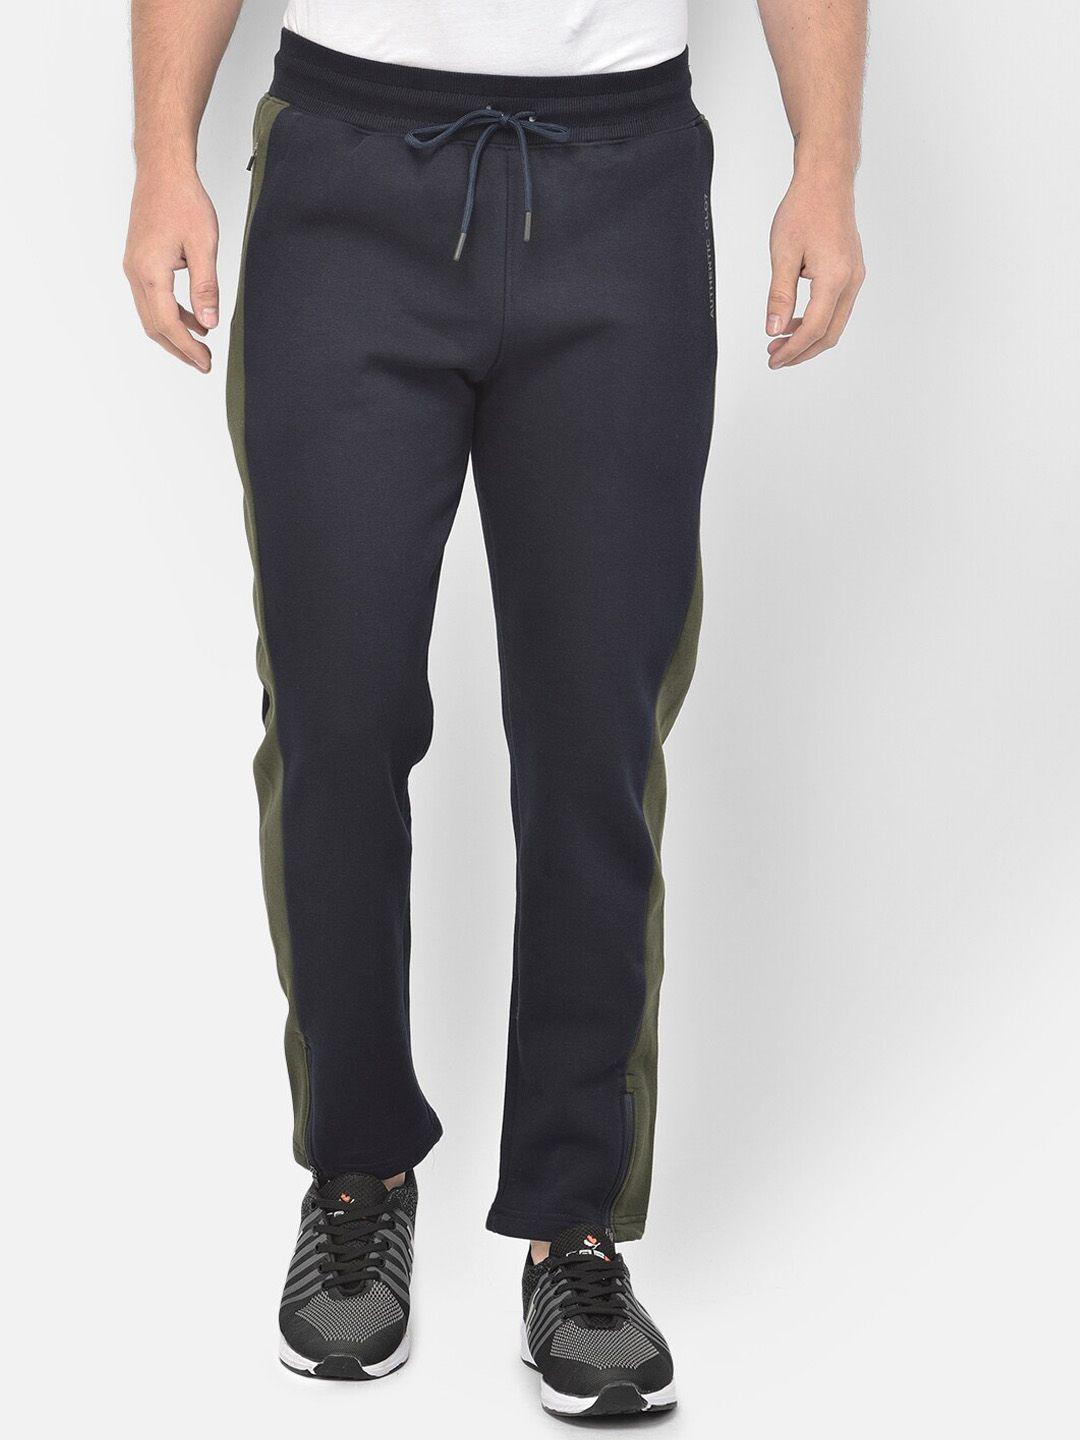 canary-london-men-navy-blue-&-green-colourblocked-straight-fit-pure-cotton-track-pants